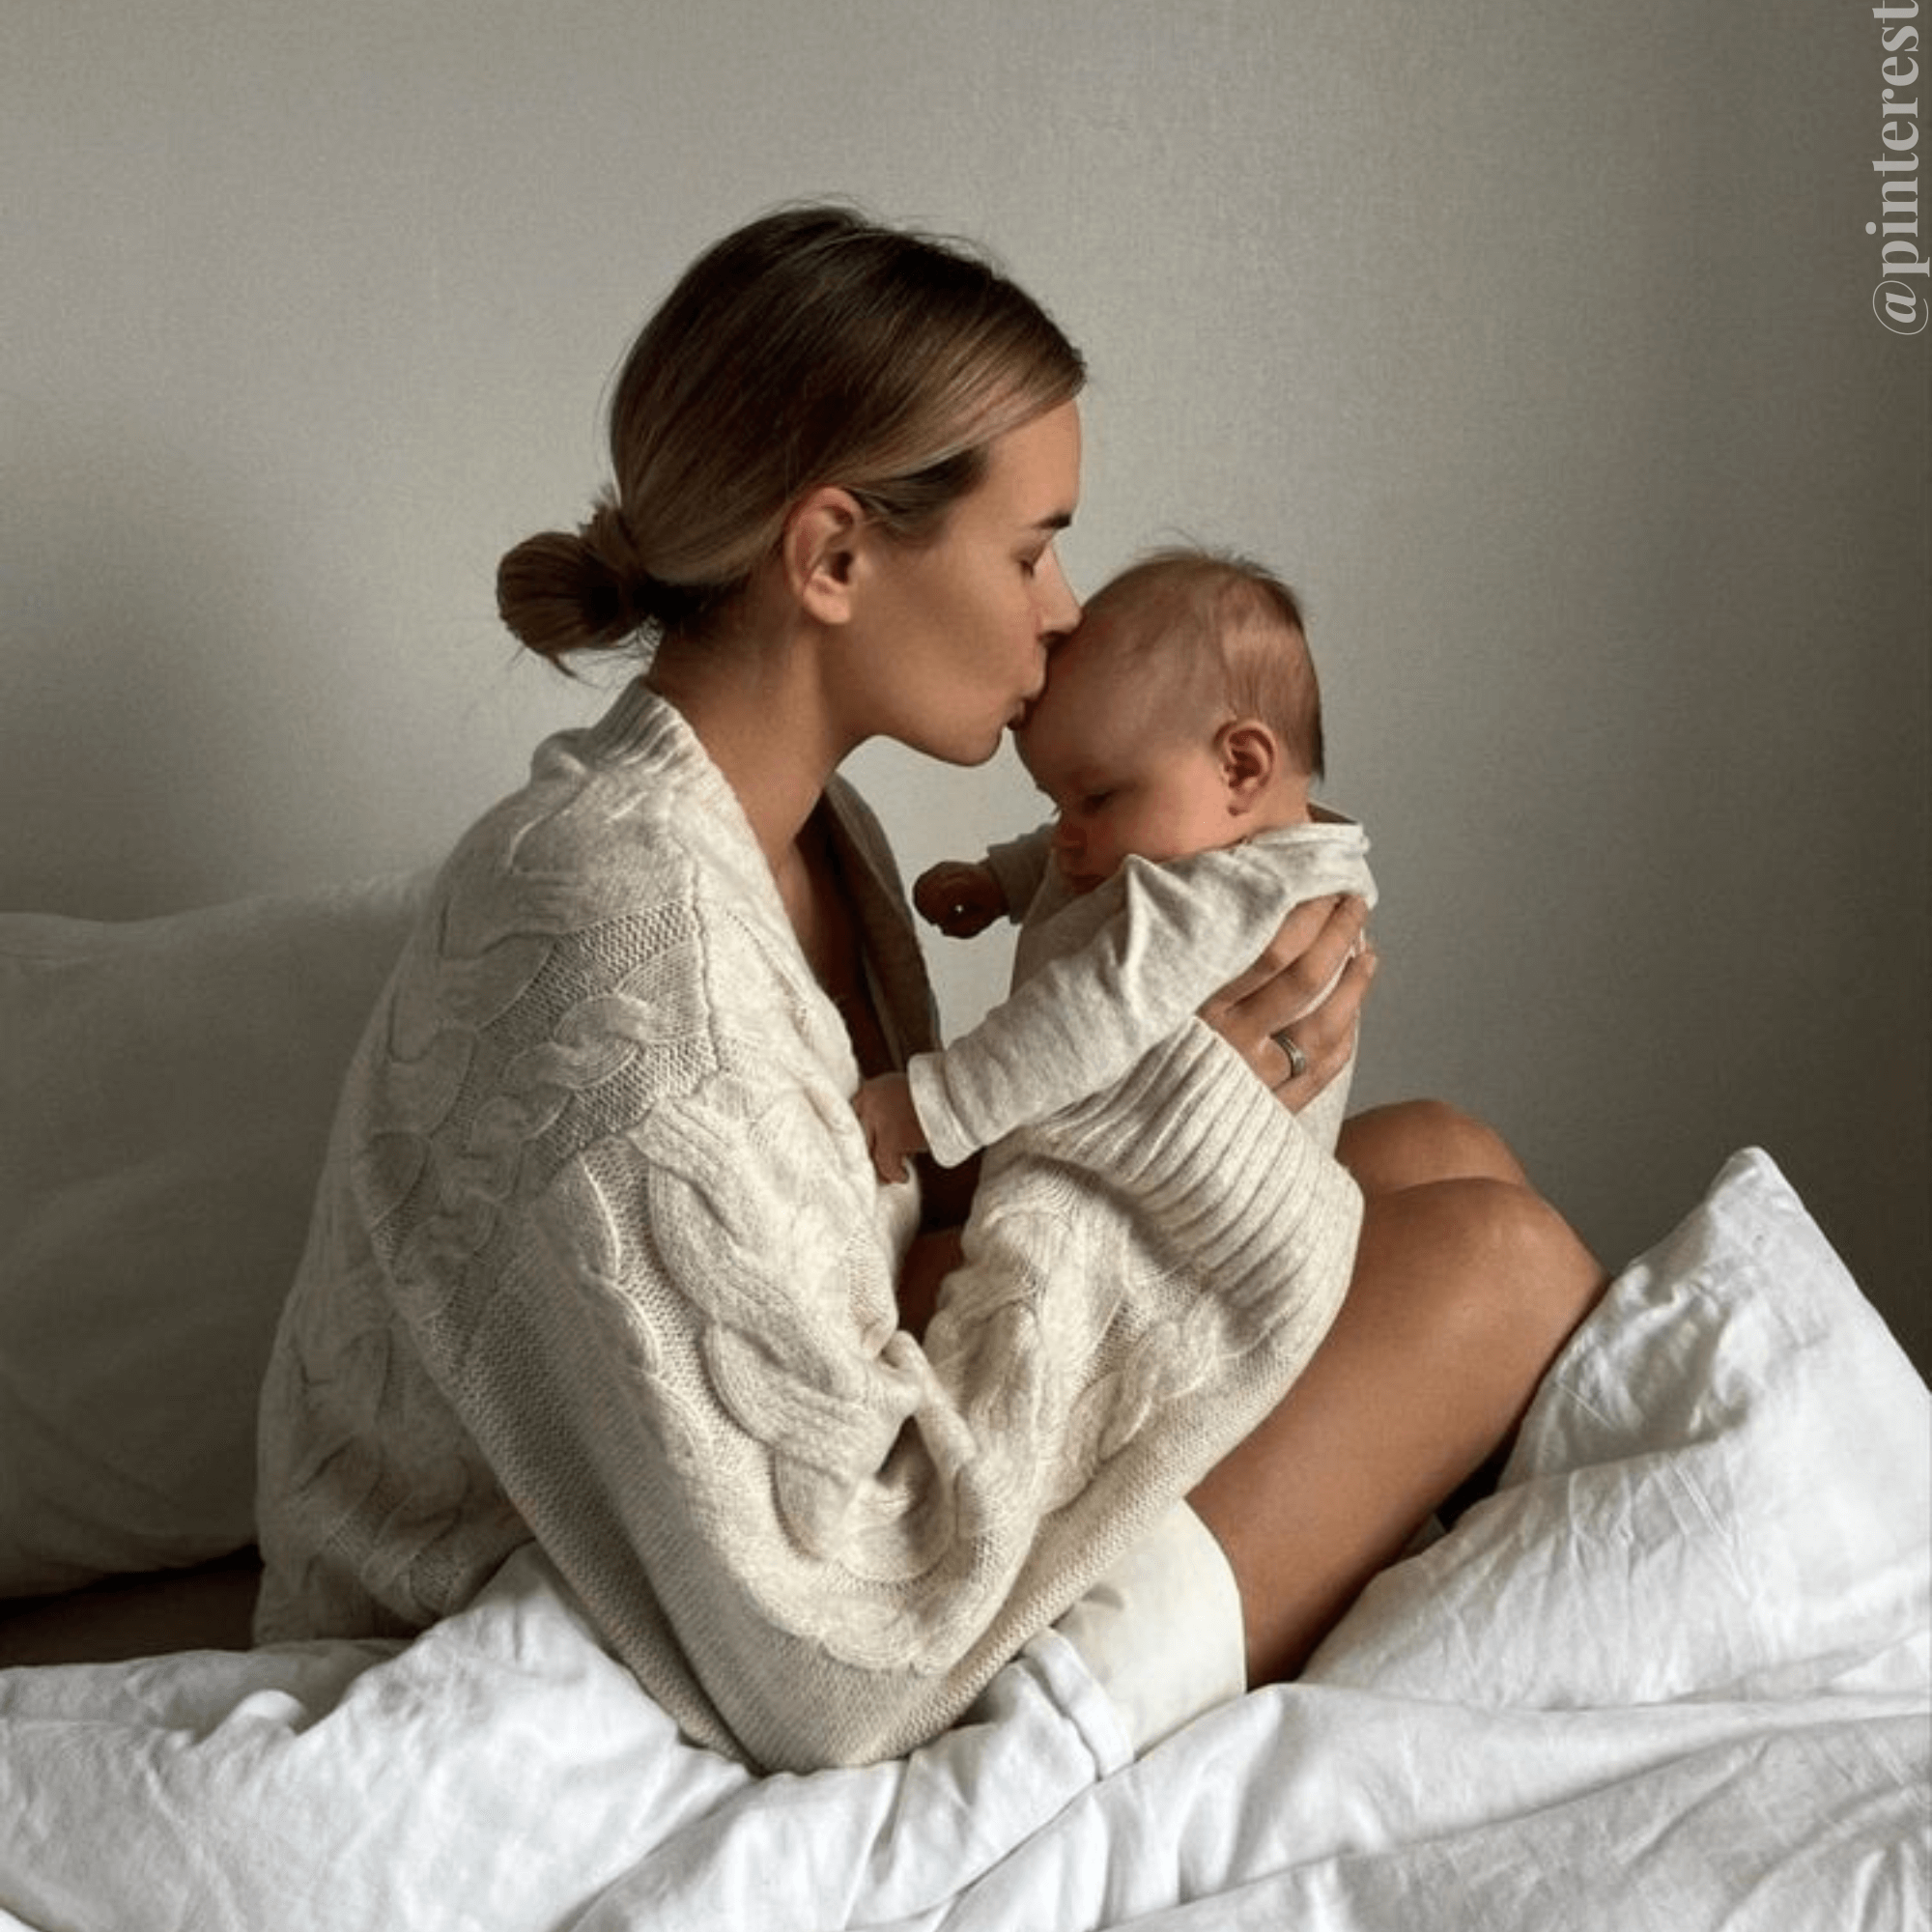 Coping With Baby Blues & Post Natal Depression